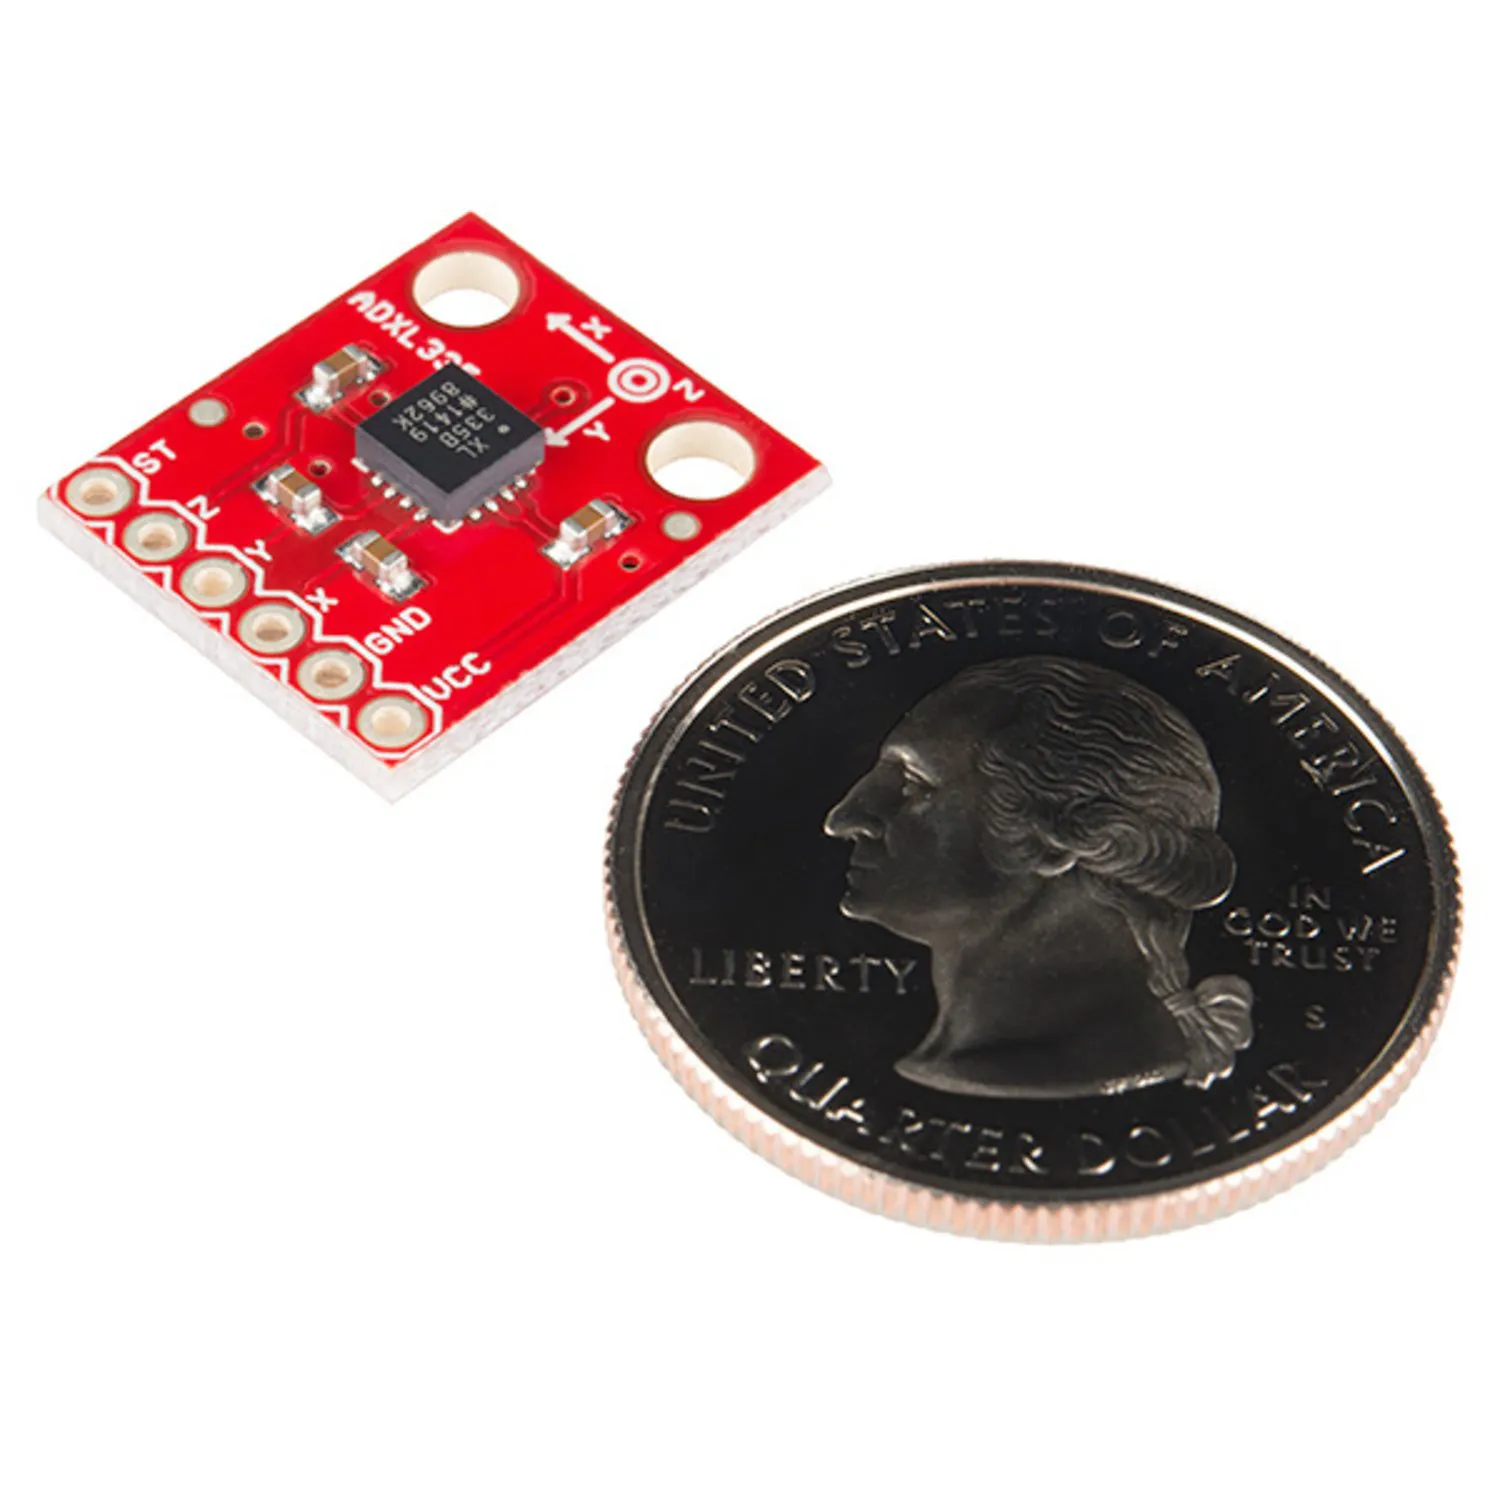 Photo of SparkFun Triple Axis Accelerometer Breakout - ADXL335